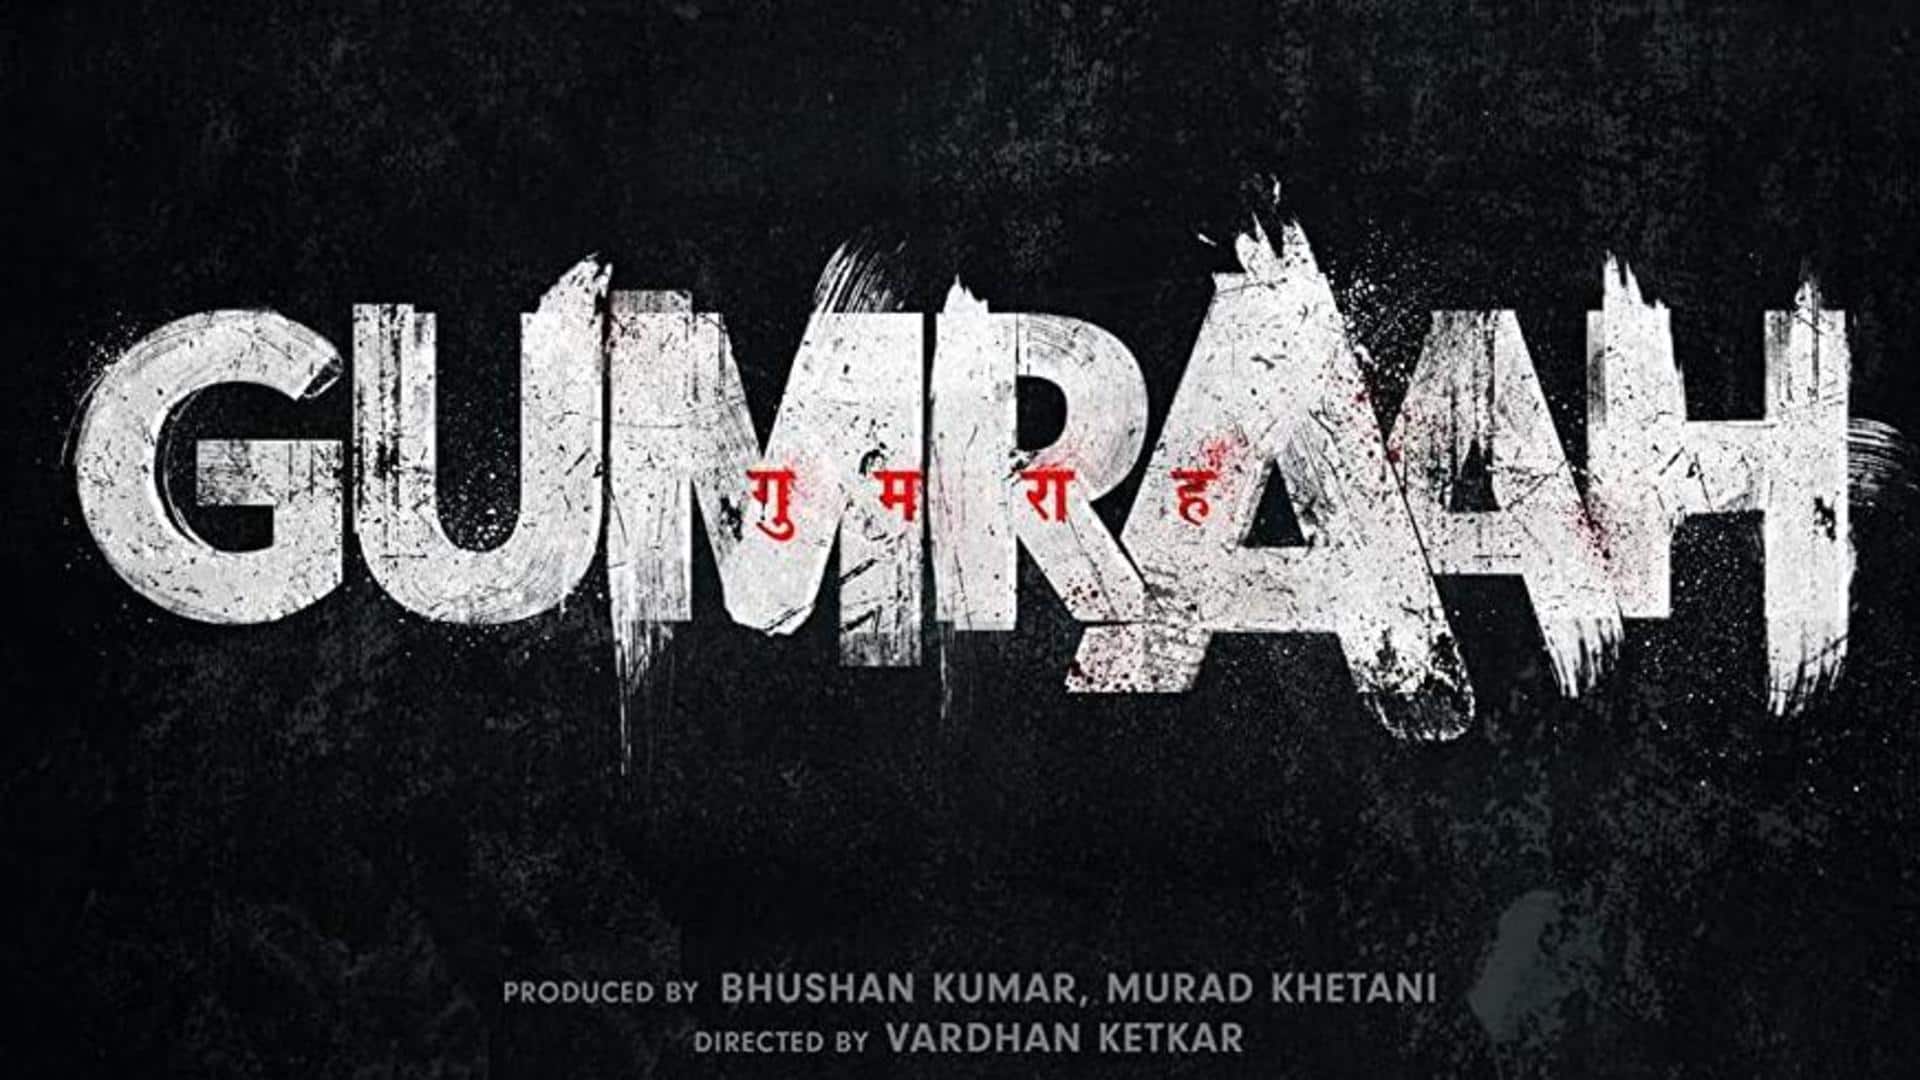 Box office: 'Gumraah' crashes badly with no chance of return